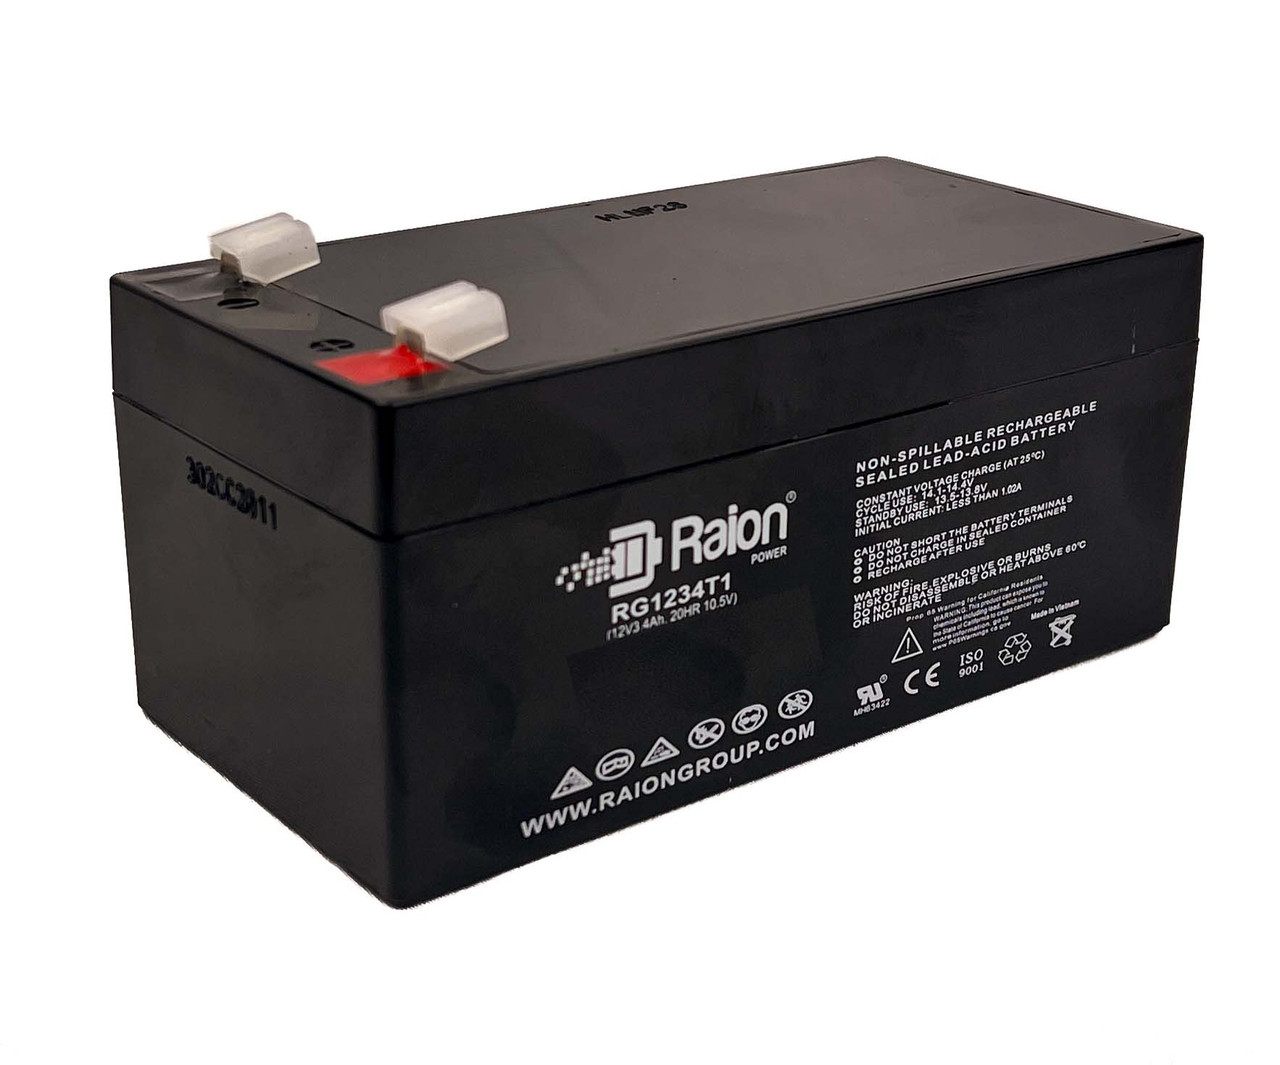 Raion Power 12V 3.4Ah Non-Spillable Replacement Battery for Wing ES 3.2-12vds